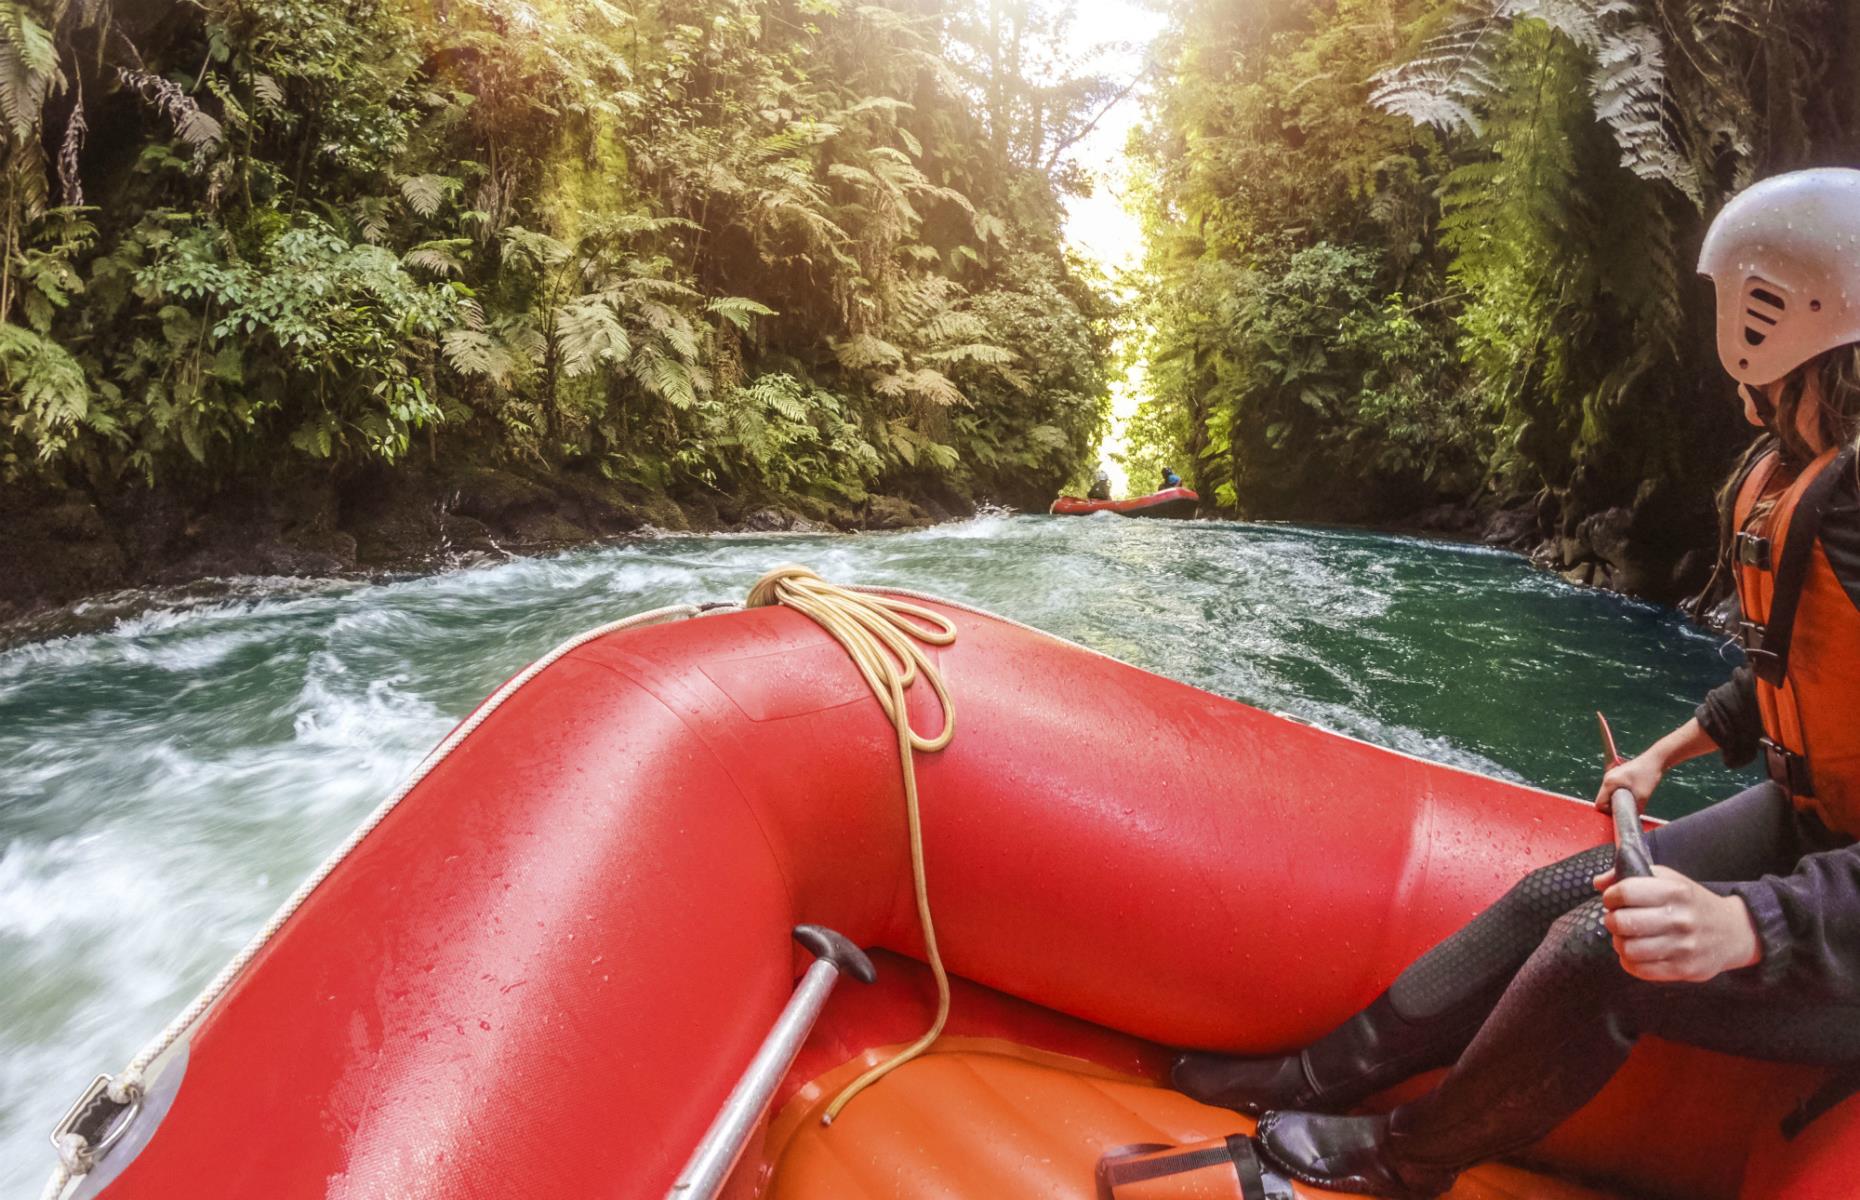 <p>New Zealand has some of the best white-water rafting in the world and Kaituna River near Rotorua is no exception. The river – one of the warmest in New Zealand – can be rafted year-round, but spring (September, October and November), is when the waterfalls are particularly epic. <a href="https://kaitunacascades.co.nz/tour/kaituna-river/">Kaituna Cascades</a> offer 50-minute Grade 5 rafting tours tackling 14 rapids along the river.</p>